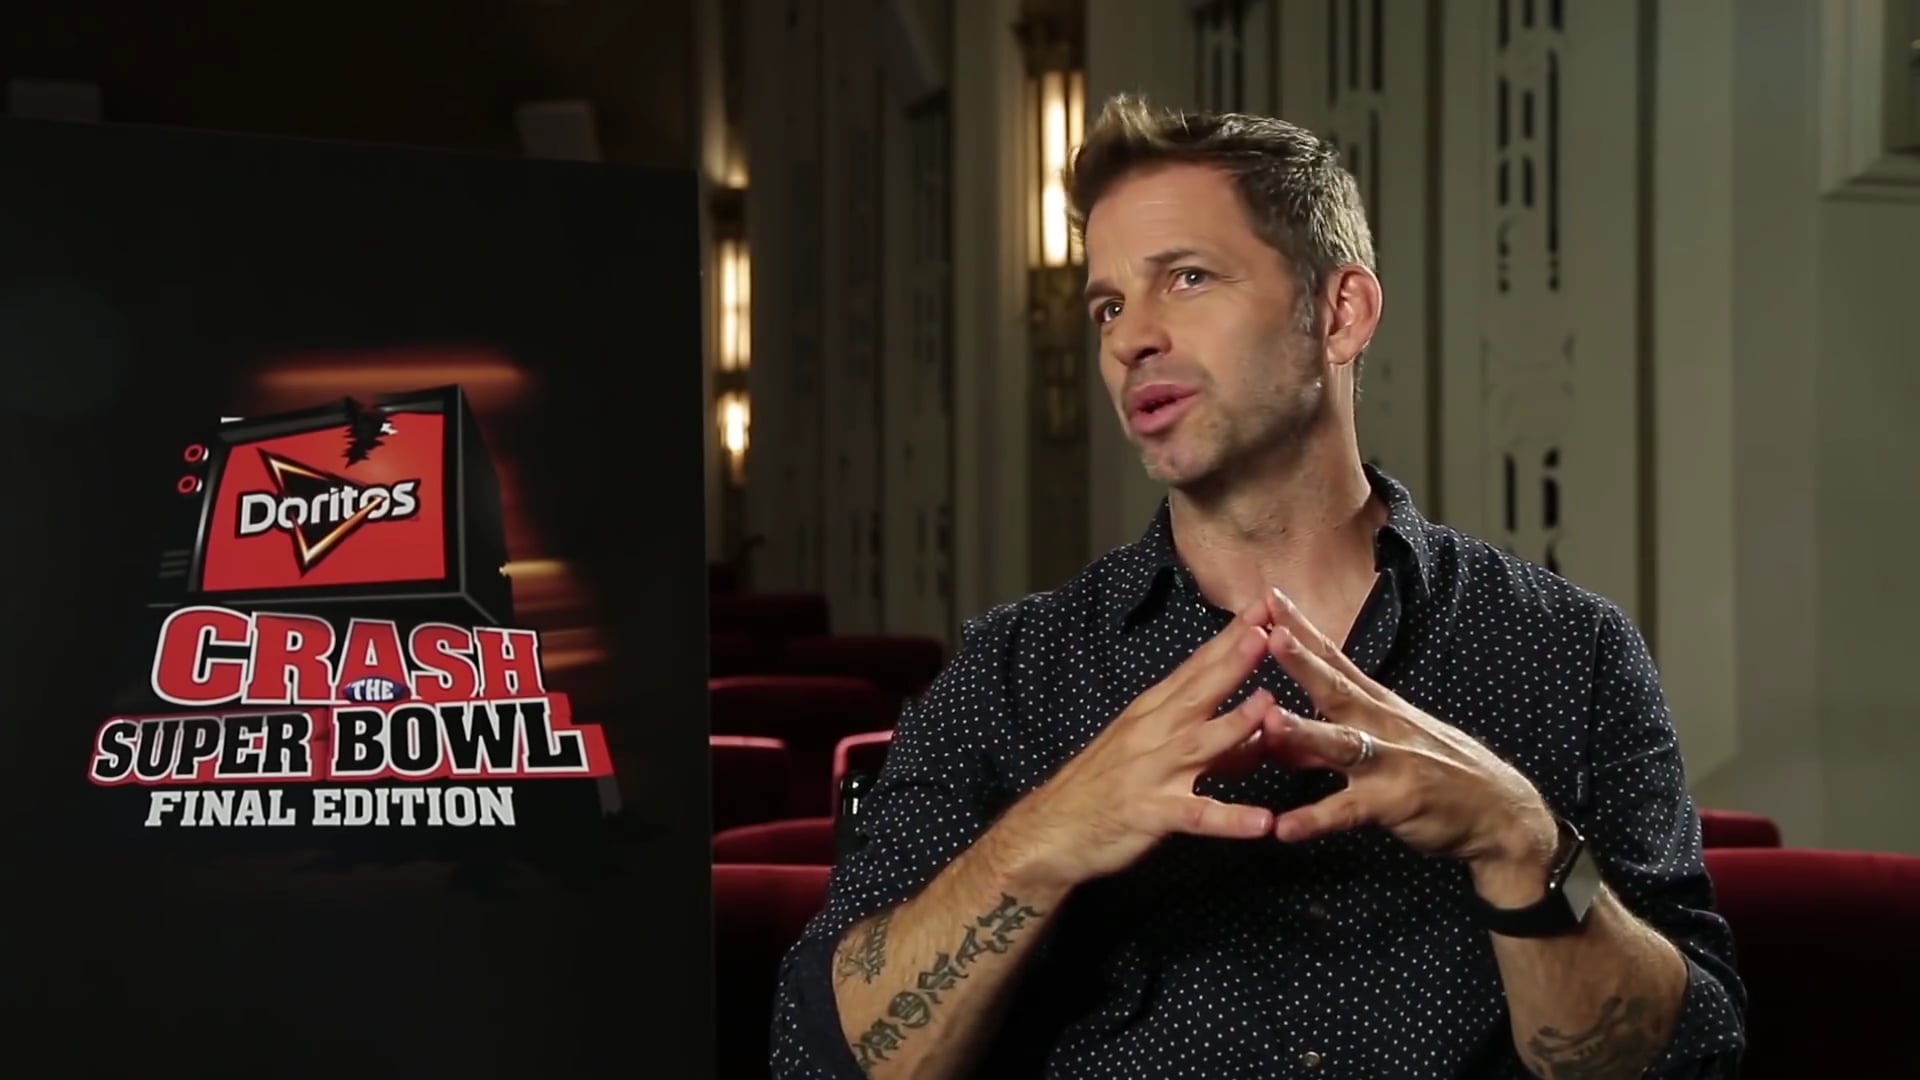 Zack Snyder wants you for Crash the Super Bowl Final Edition (Commercial)